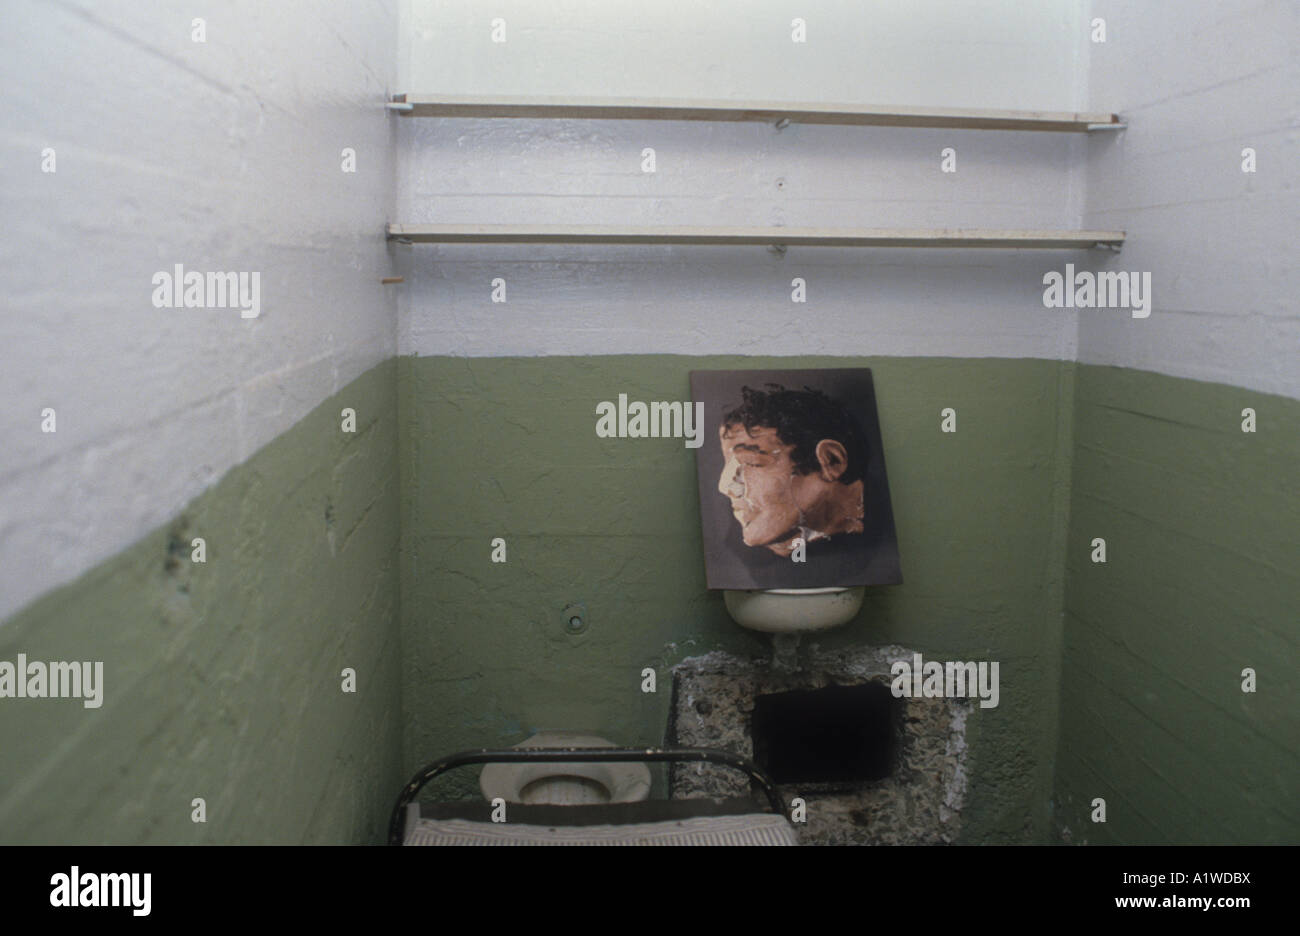 Alcatraz Prison Cell,Portrait Of The Prisoner Who Occupied The Cell & Escaped With Two Others Never To Be Seen Again. Stock Photo